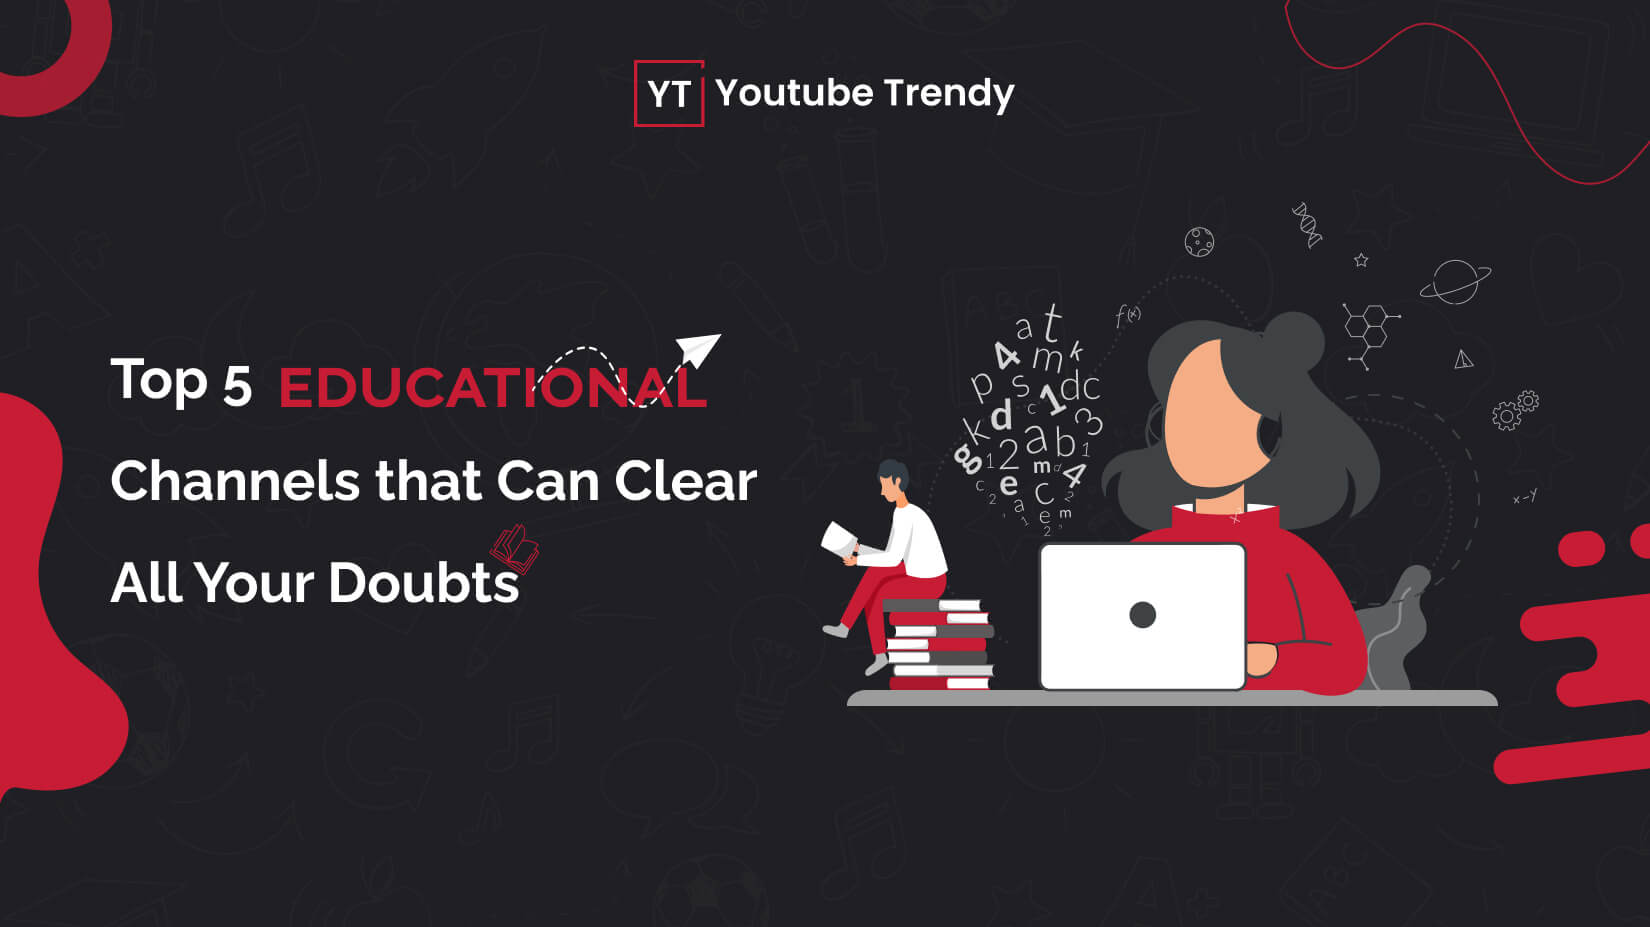 The top 5 educational channels